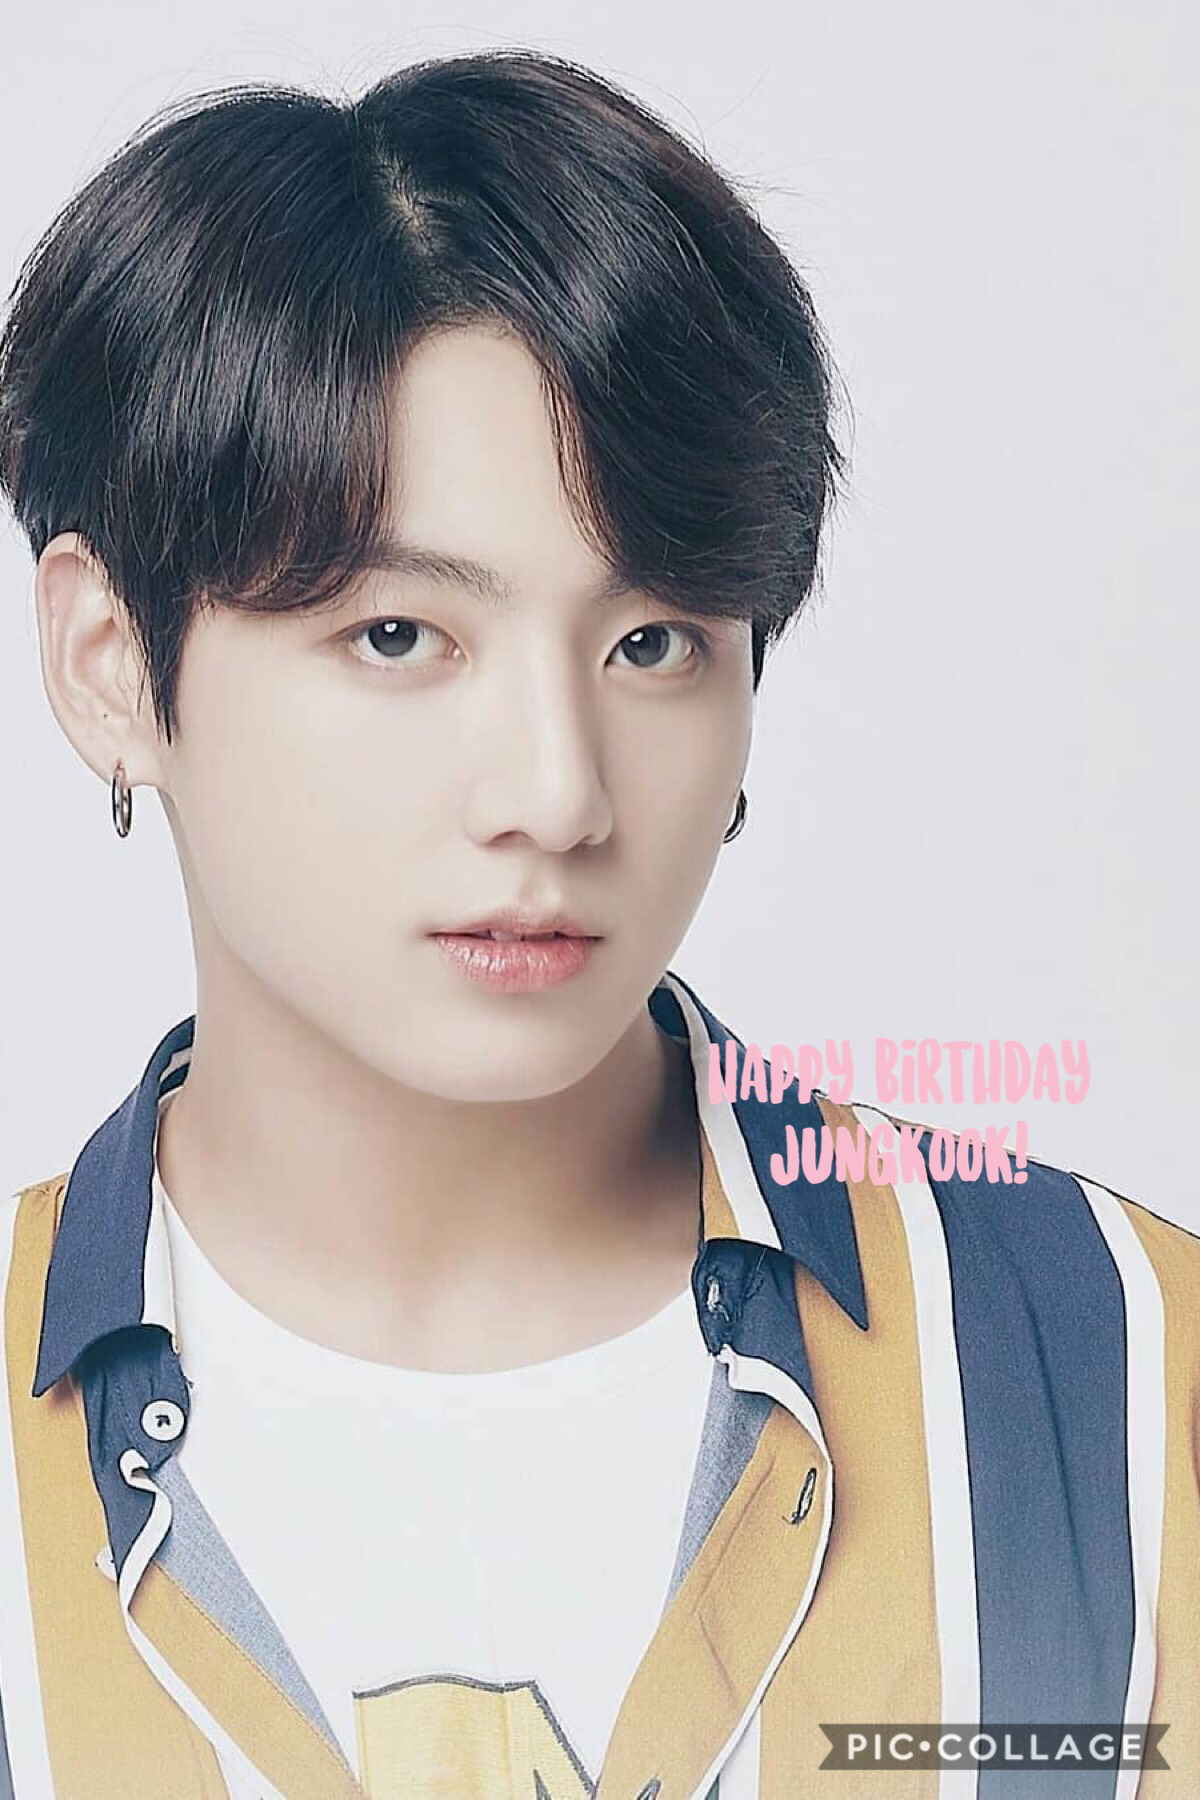 happy birthday jungkook!
thank u for teaching me to luv myself 
ILYSM
tyyy for letting me luv BTS!
GOLDEN MAKNAE 💓